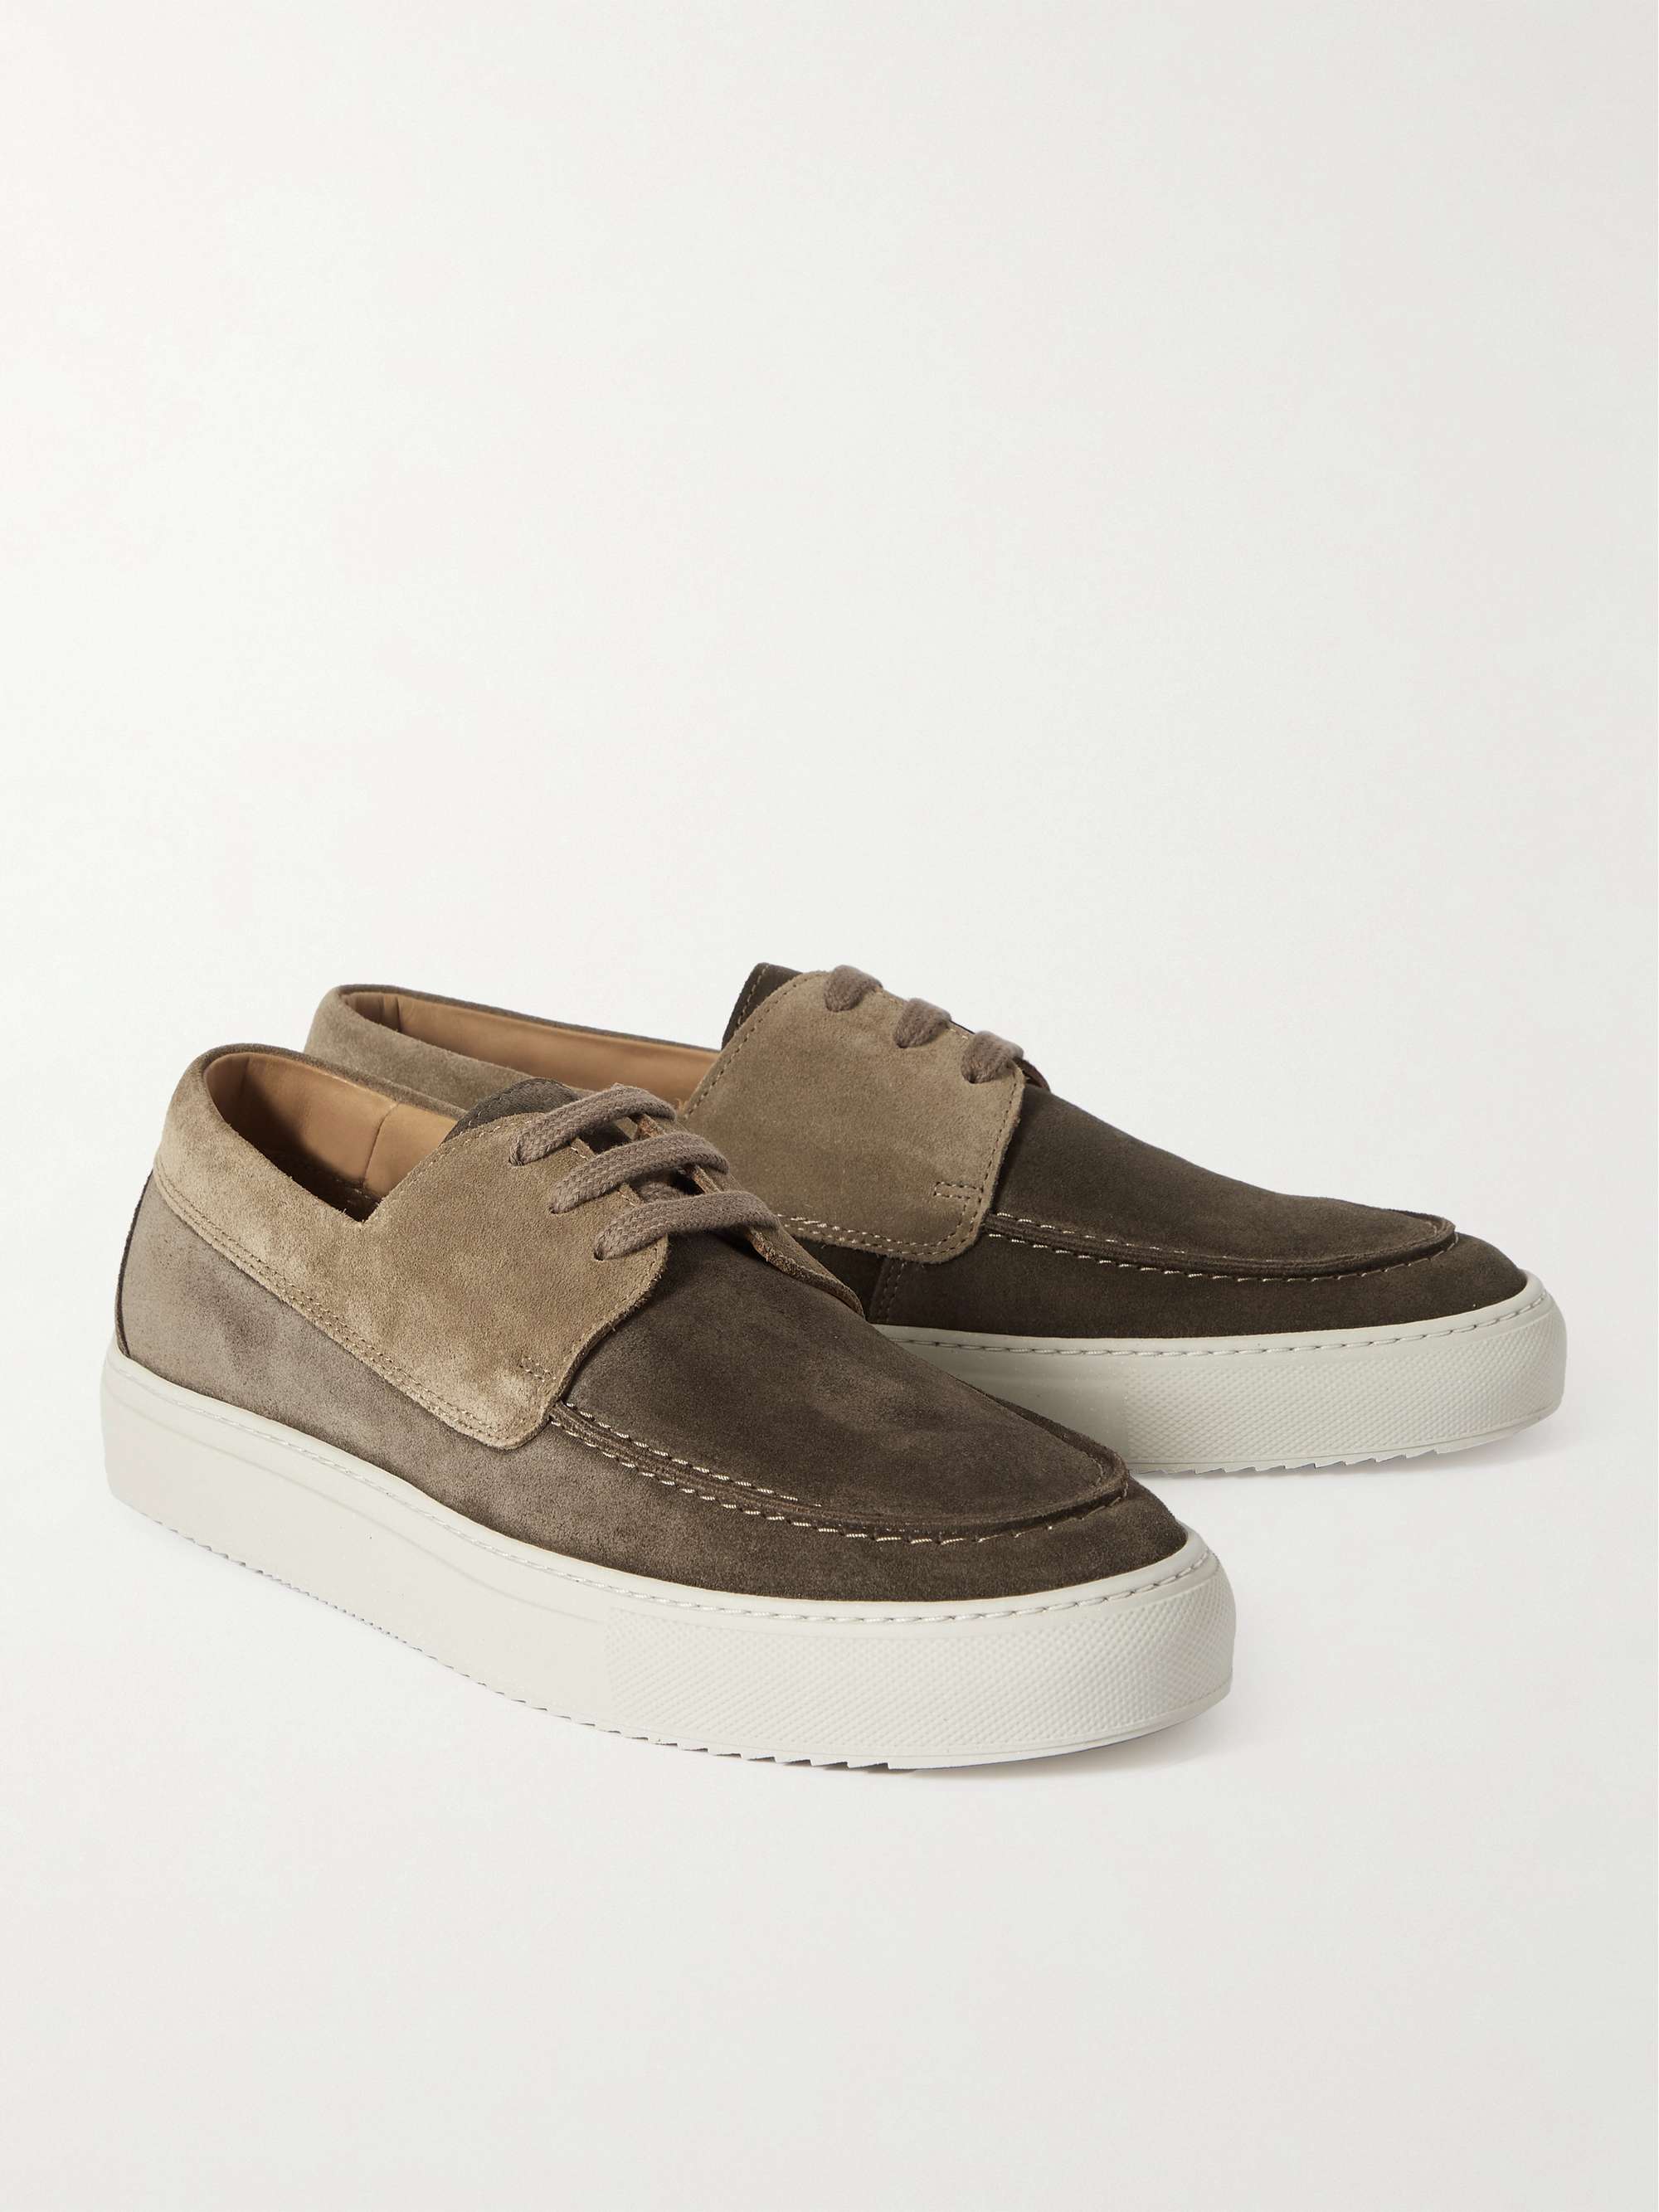 MR P. Larry Two-Tone Regenerated Suede by evolo® Boat Shoes for Men ...